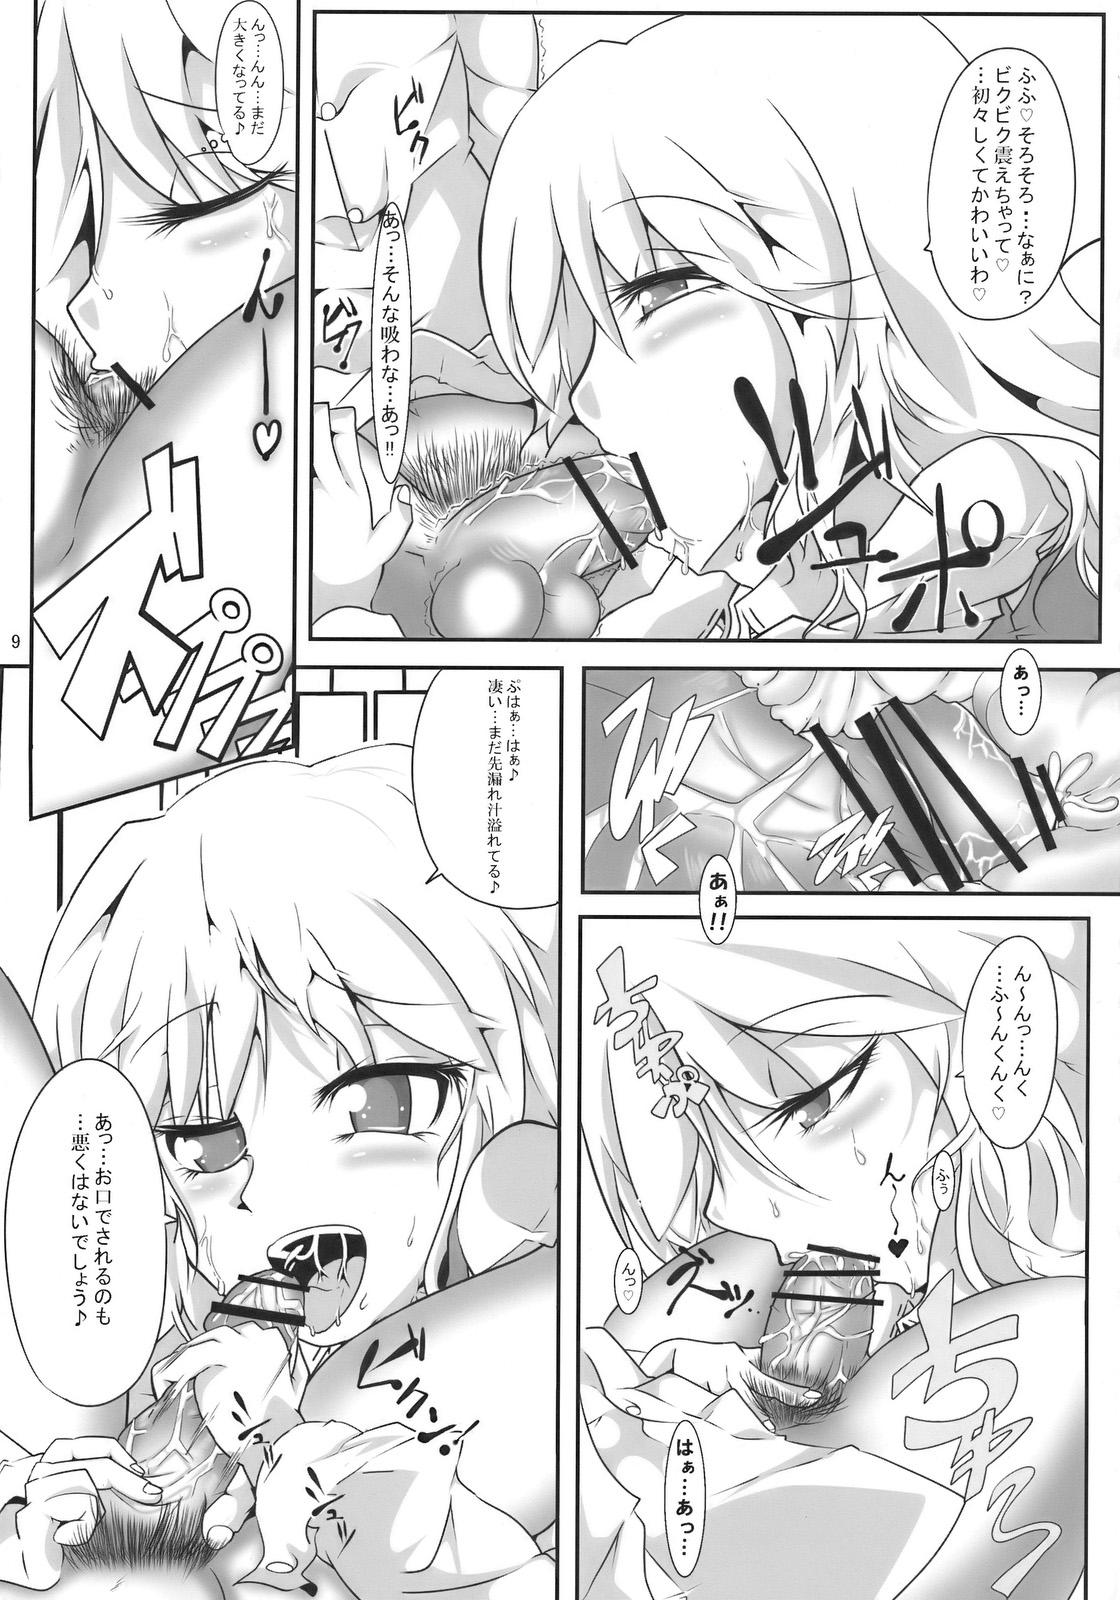 Prostitute AriMAX 3 - Miracle Moon - Touhou project Stepson - Page 9